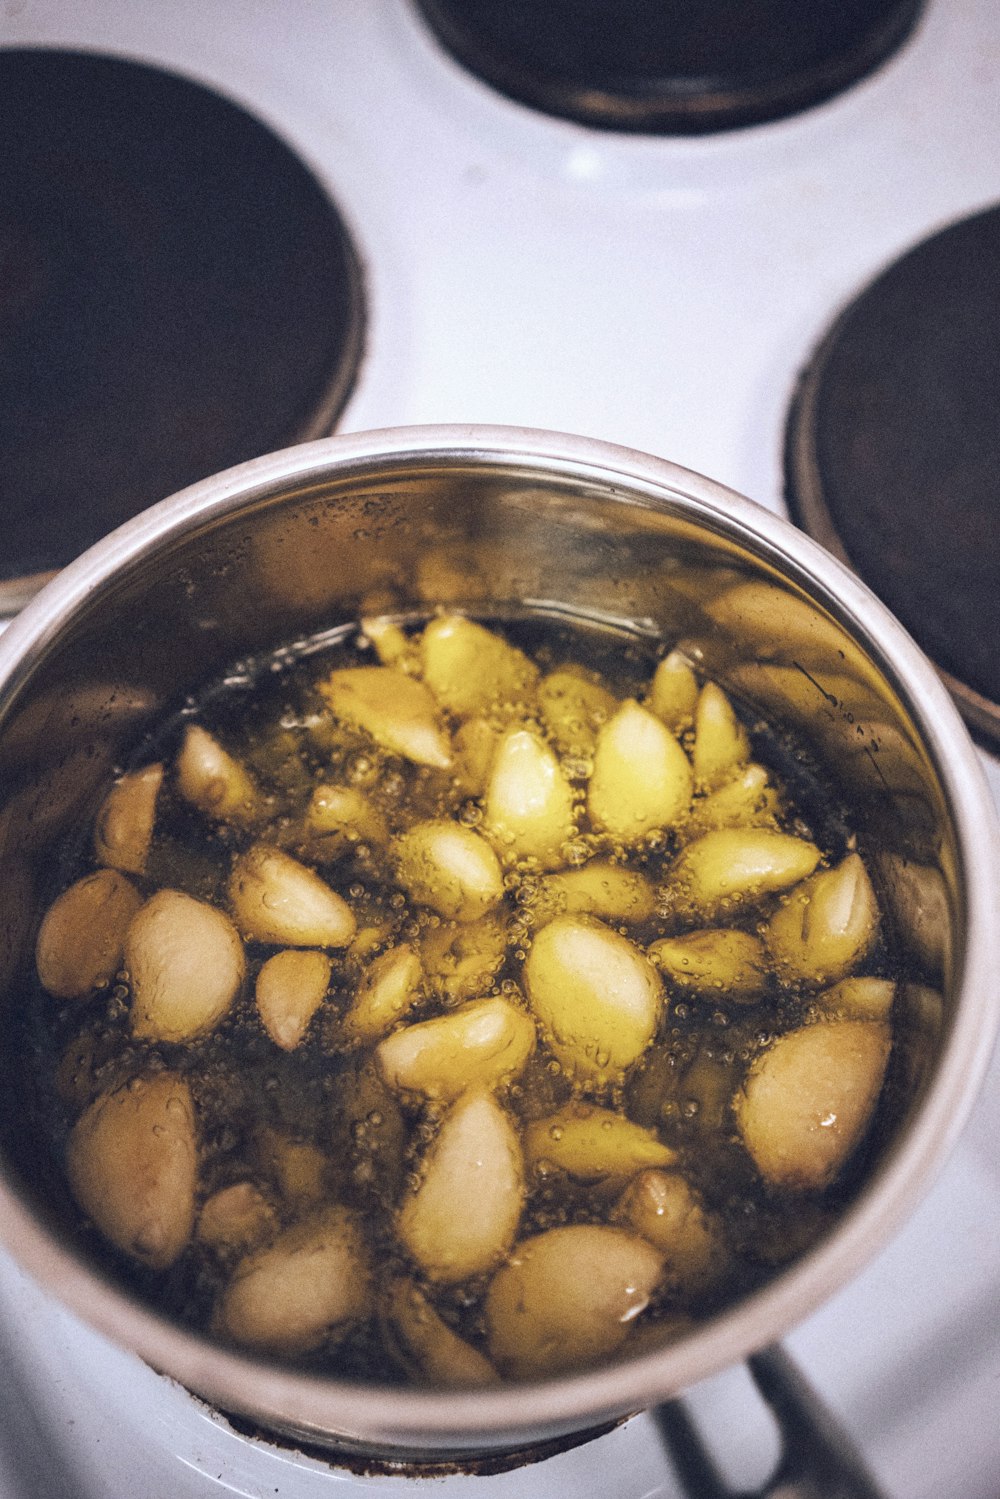 brown and yellow food in stainless steel cooking pot